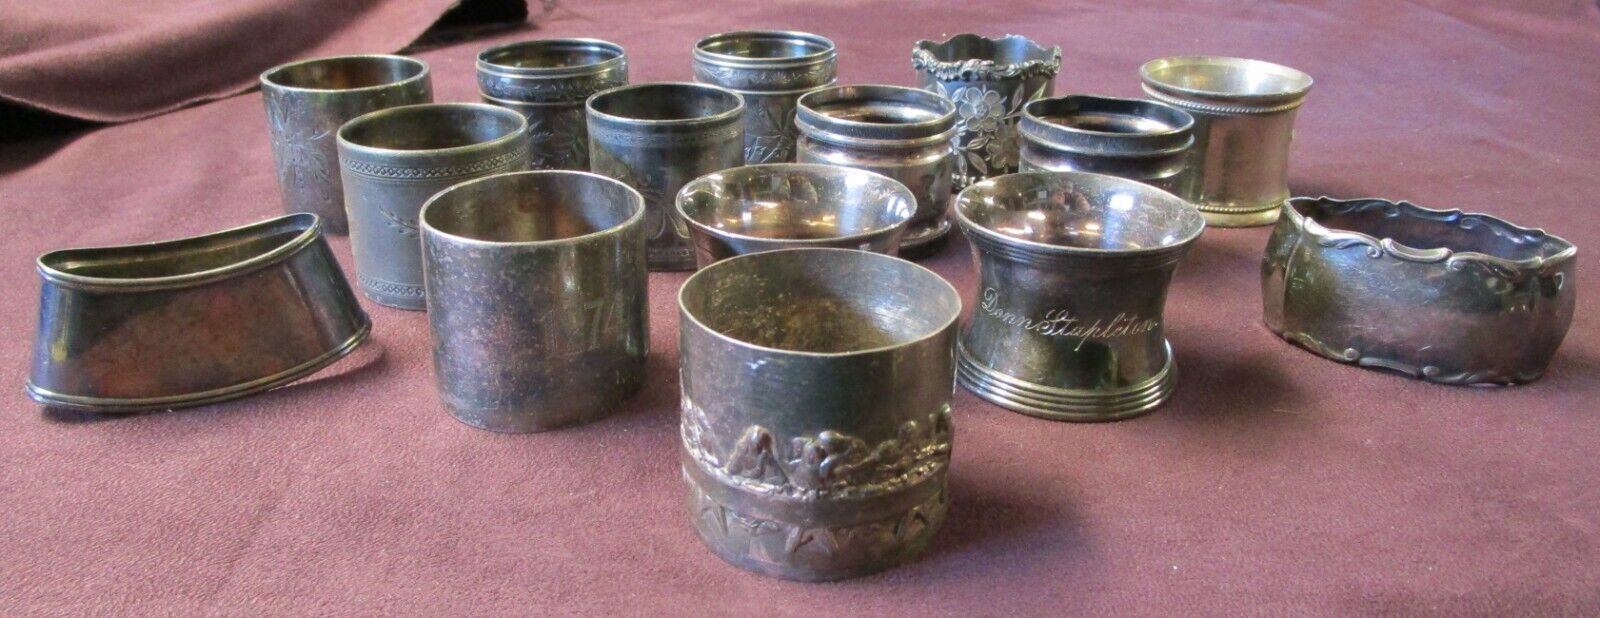 Antique Lot 15 Silverplate Victorian Napkin Rings Brite Cut Embossed Unpolished